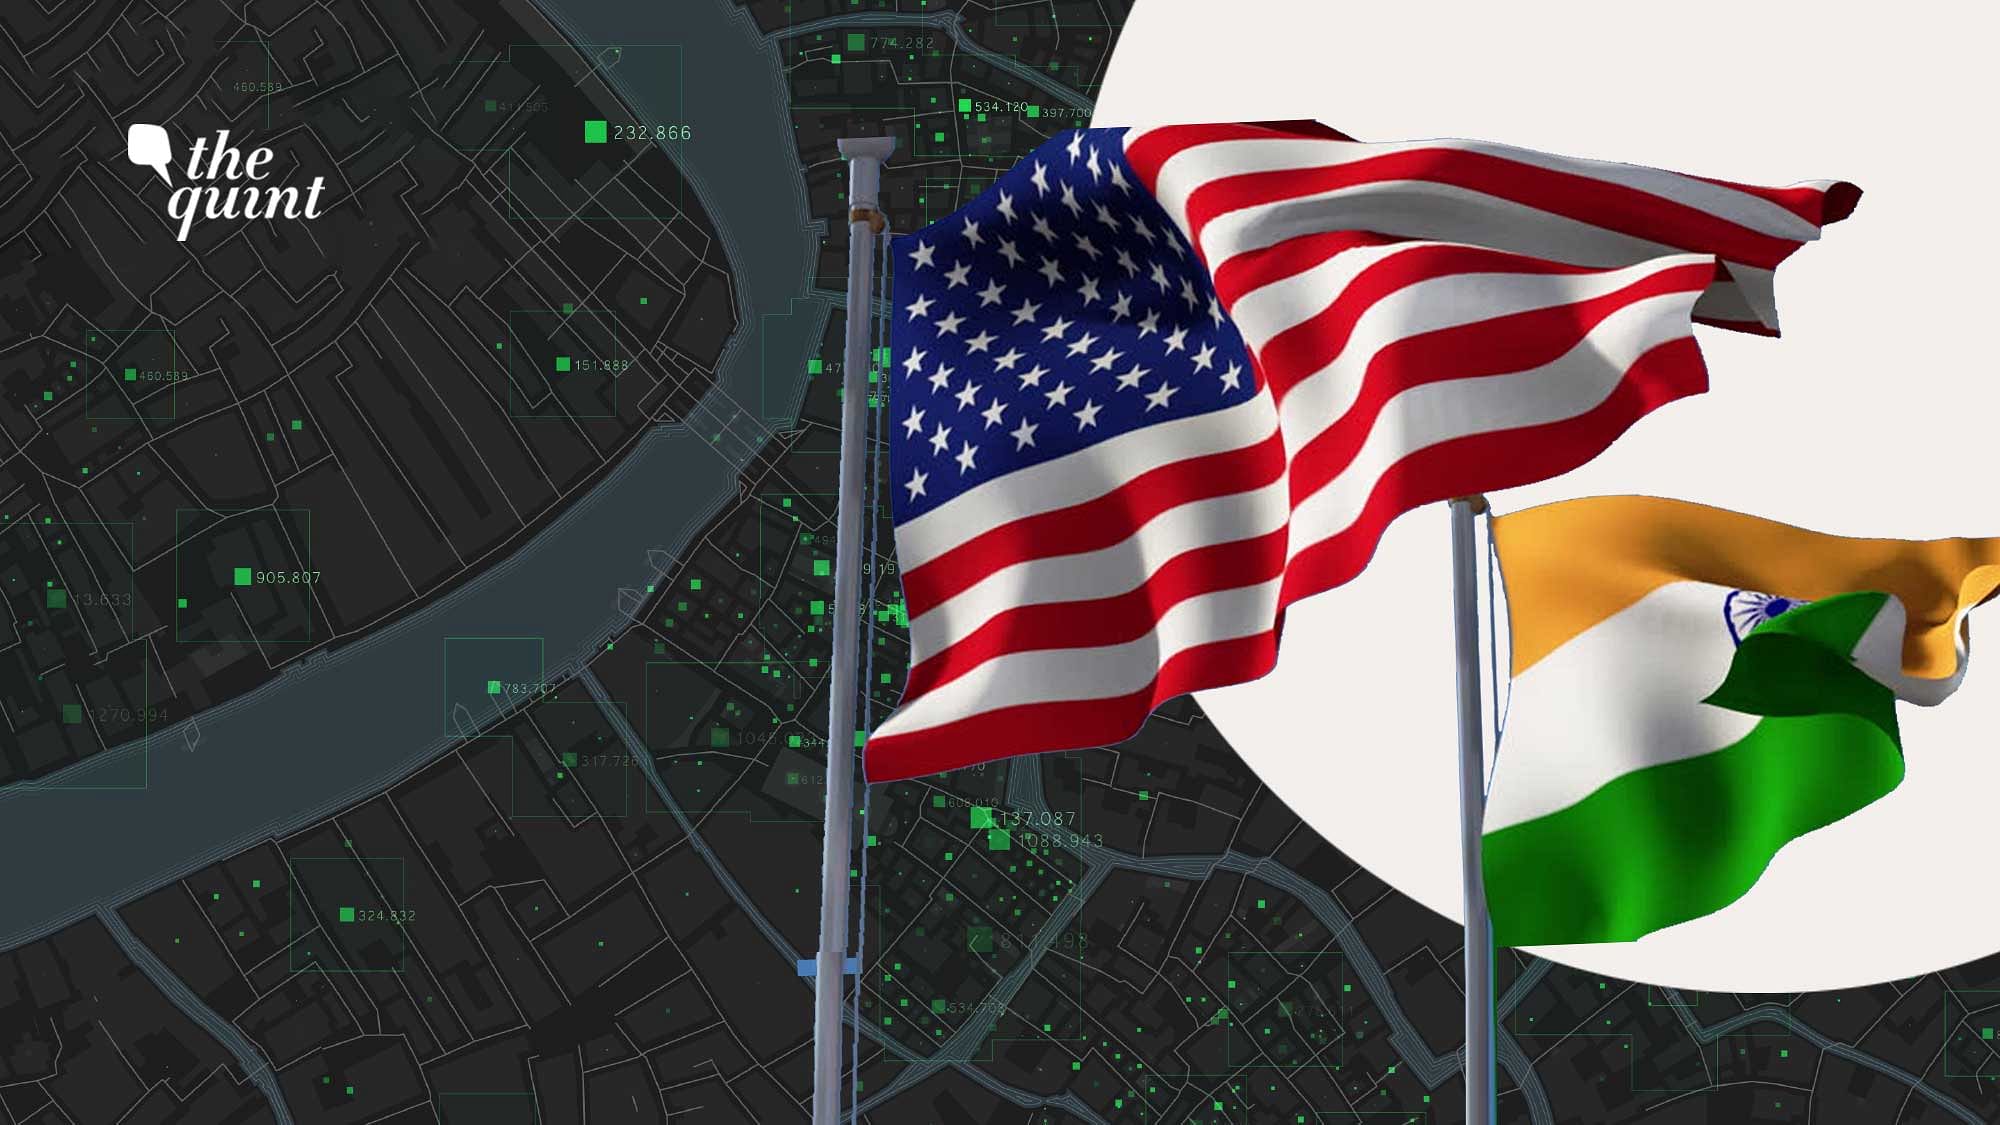 Image of Indian and American flags and illustration of geospatial data, used for representational purposes.